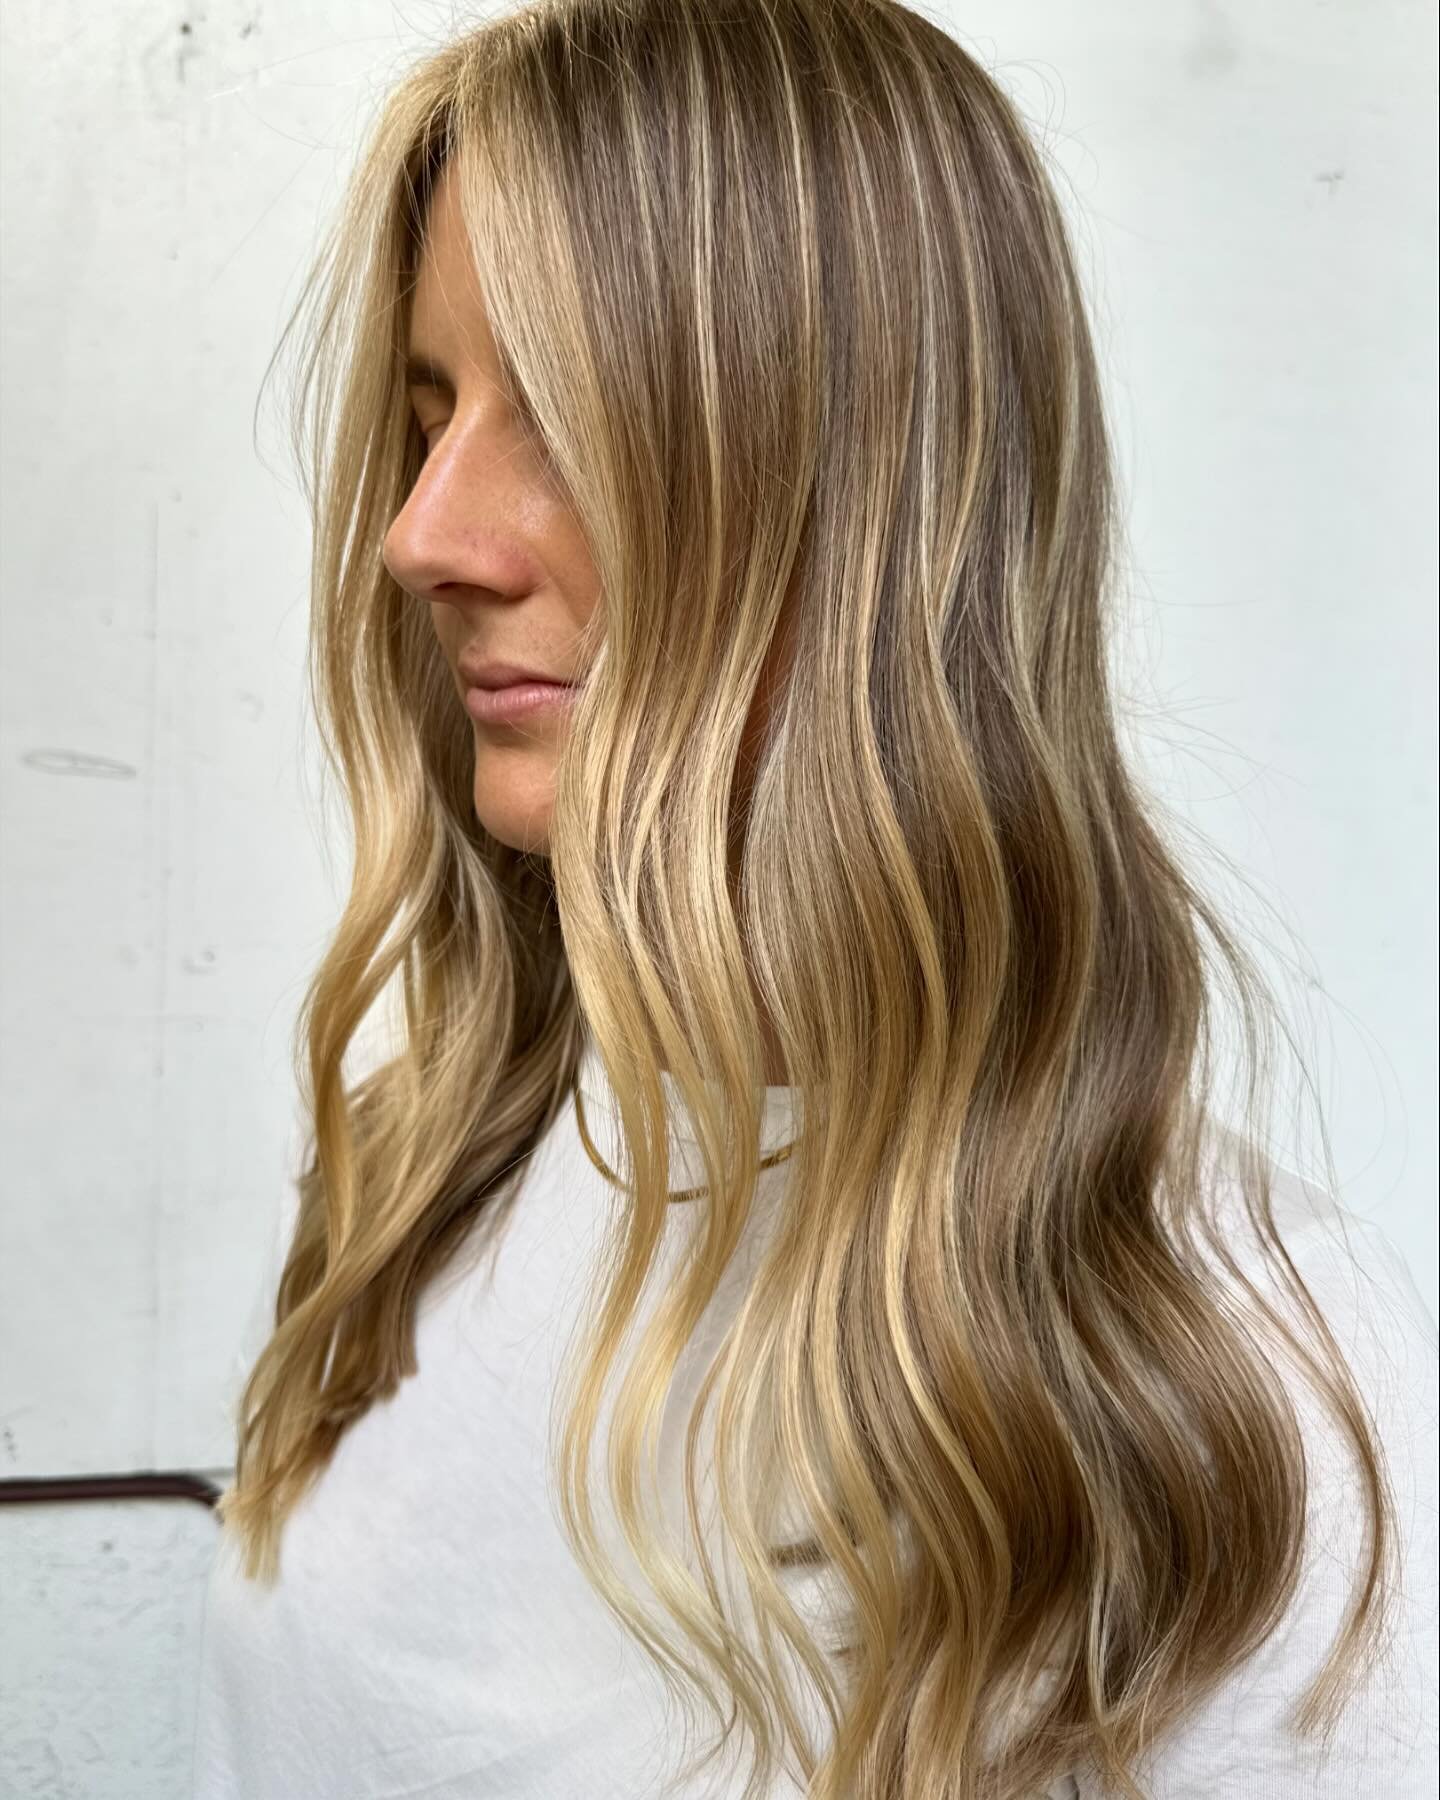 Ready to take your hair to the next level? 
Let&rsquo;s do it!

Specialising in beautiful colours; from coastal Blondes &amp; Balayage&rsquo;s, to lived-in Brondes &amp; dimensional Brunette&rsquo;s&hellip;

Reach out to chat about your hair goals
🩵